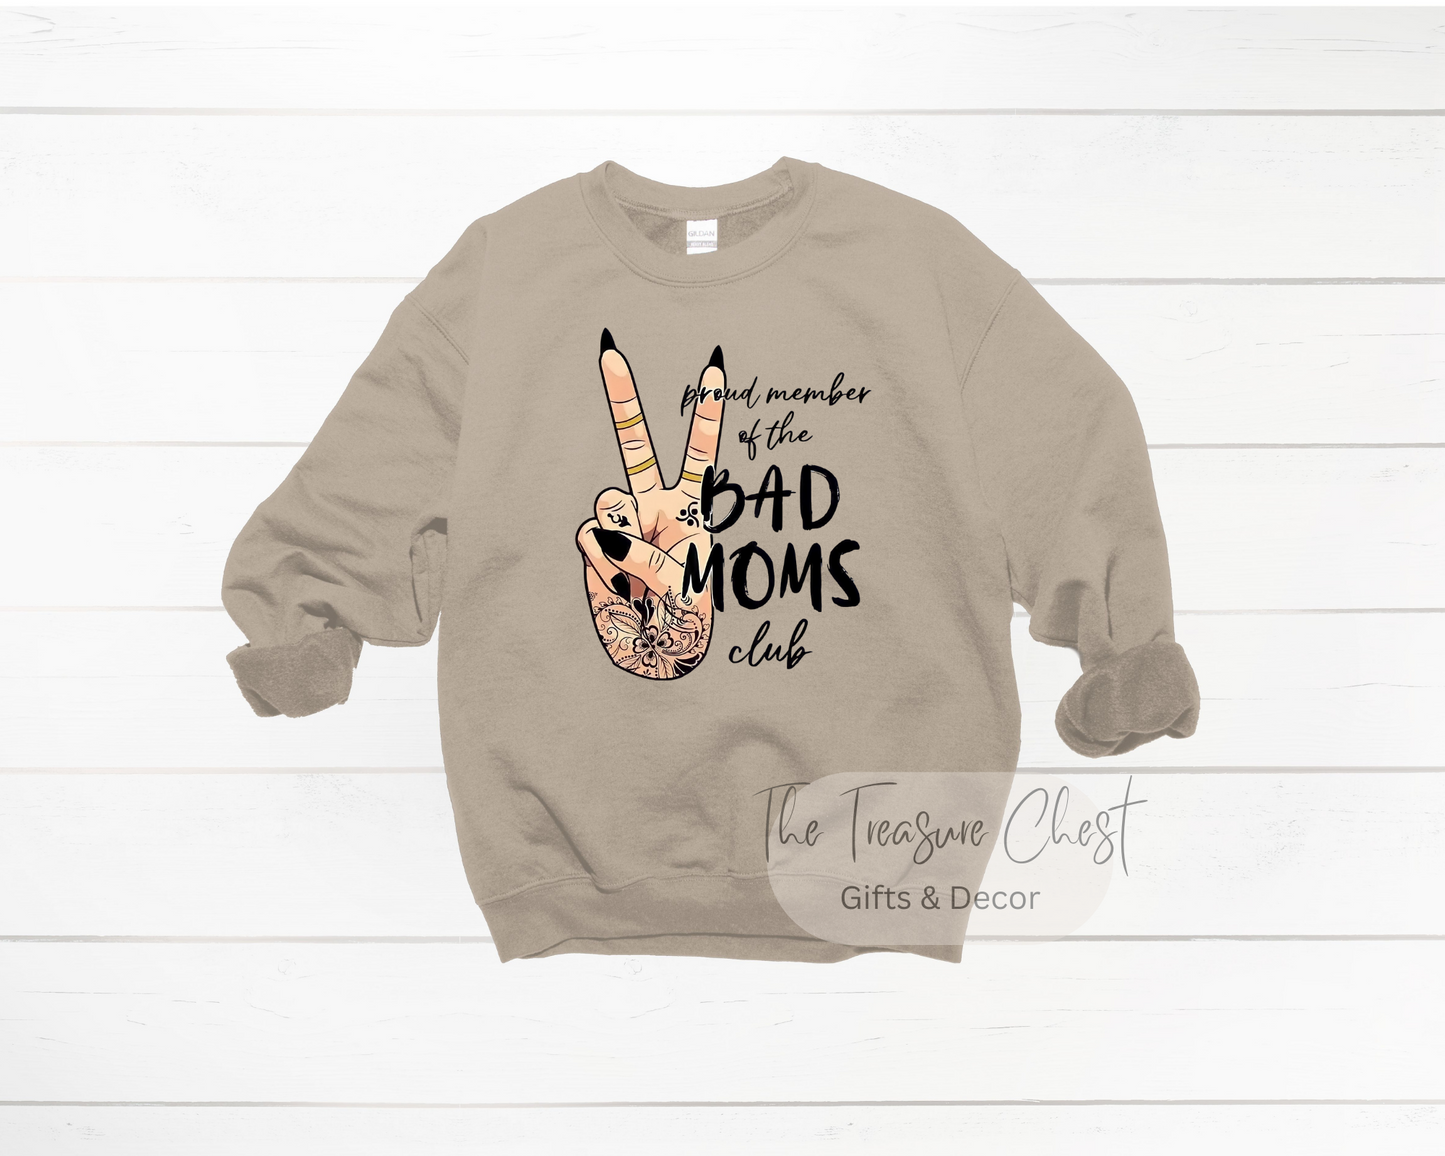 Whether you're a proud member of the Bad Mom's Club or just someone looking for a funny graphic sweatshirt to add to your wardrobe, look no further than our Bad Mom's Club crewneck sweatshirt. Featuring a hand peace sign graphic and quote.  Our sweatshirts are made of a heavy, yet soft and breathable material that maintains it's shape and size. Pair it with your favourite jeans or joggers for a casual look. Sand in colour